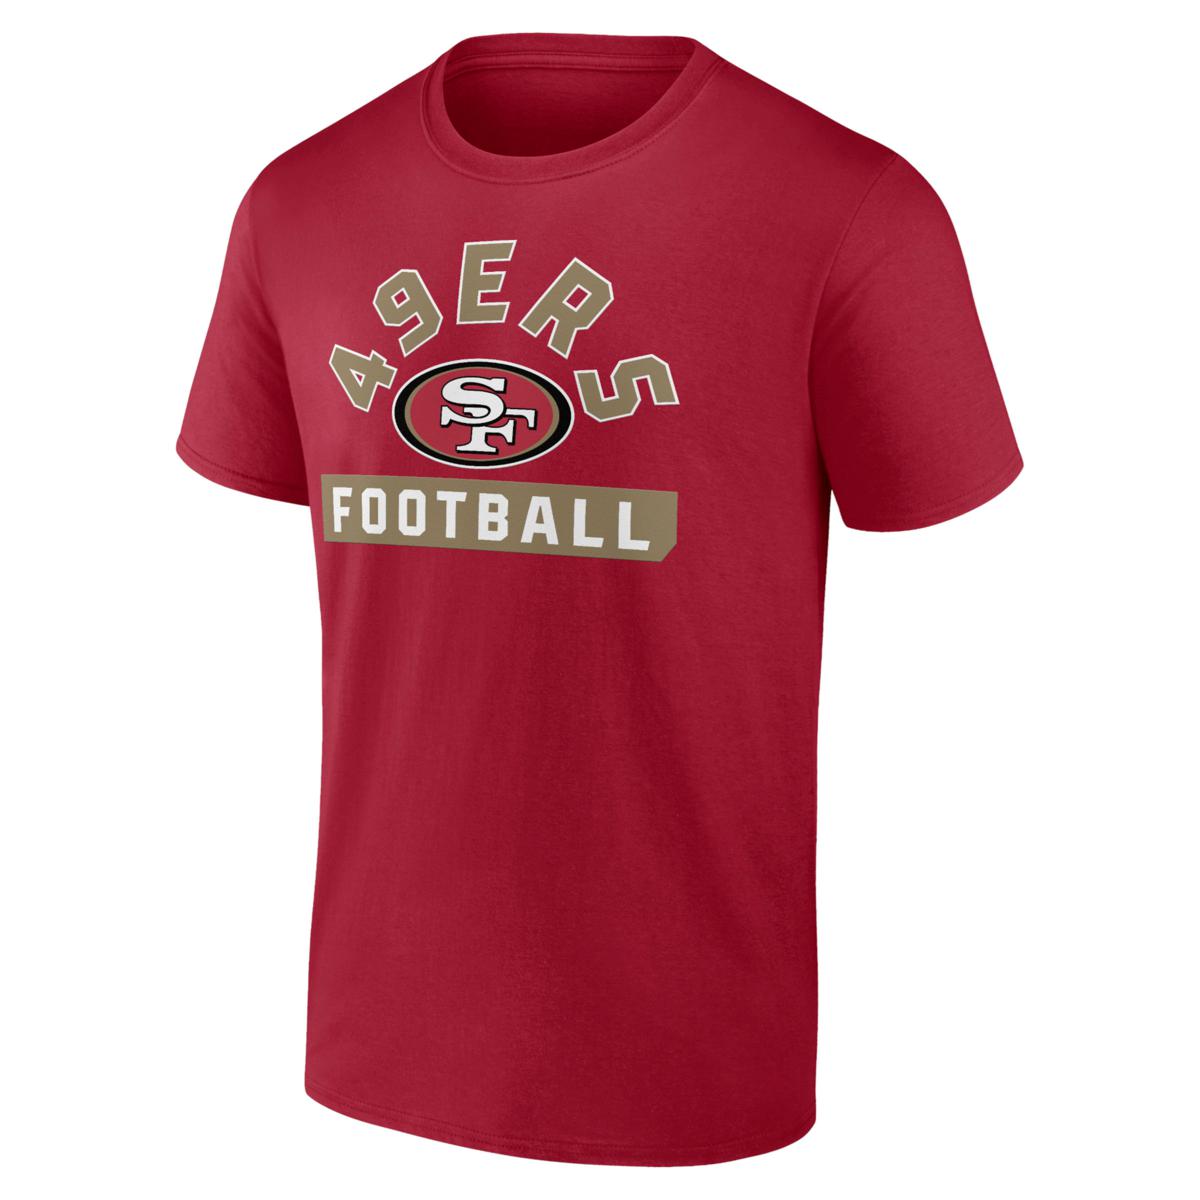 Officially Licensed NFL 3-in-1 Schedule T-Shirt Combo 2pk by